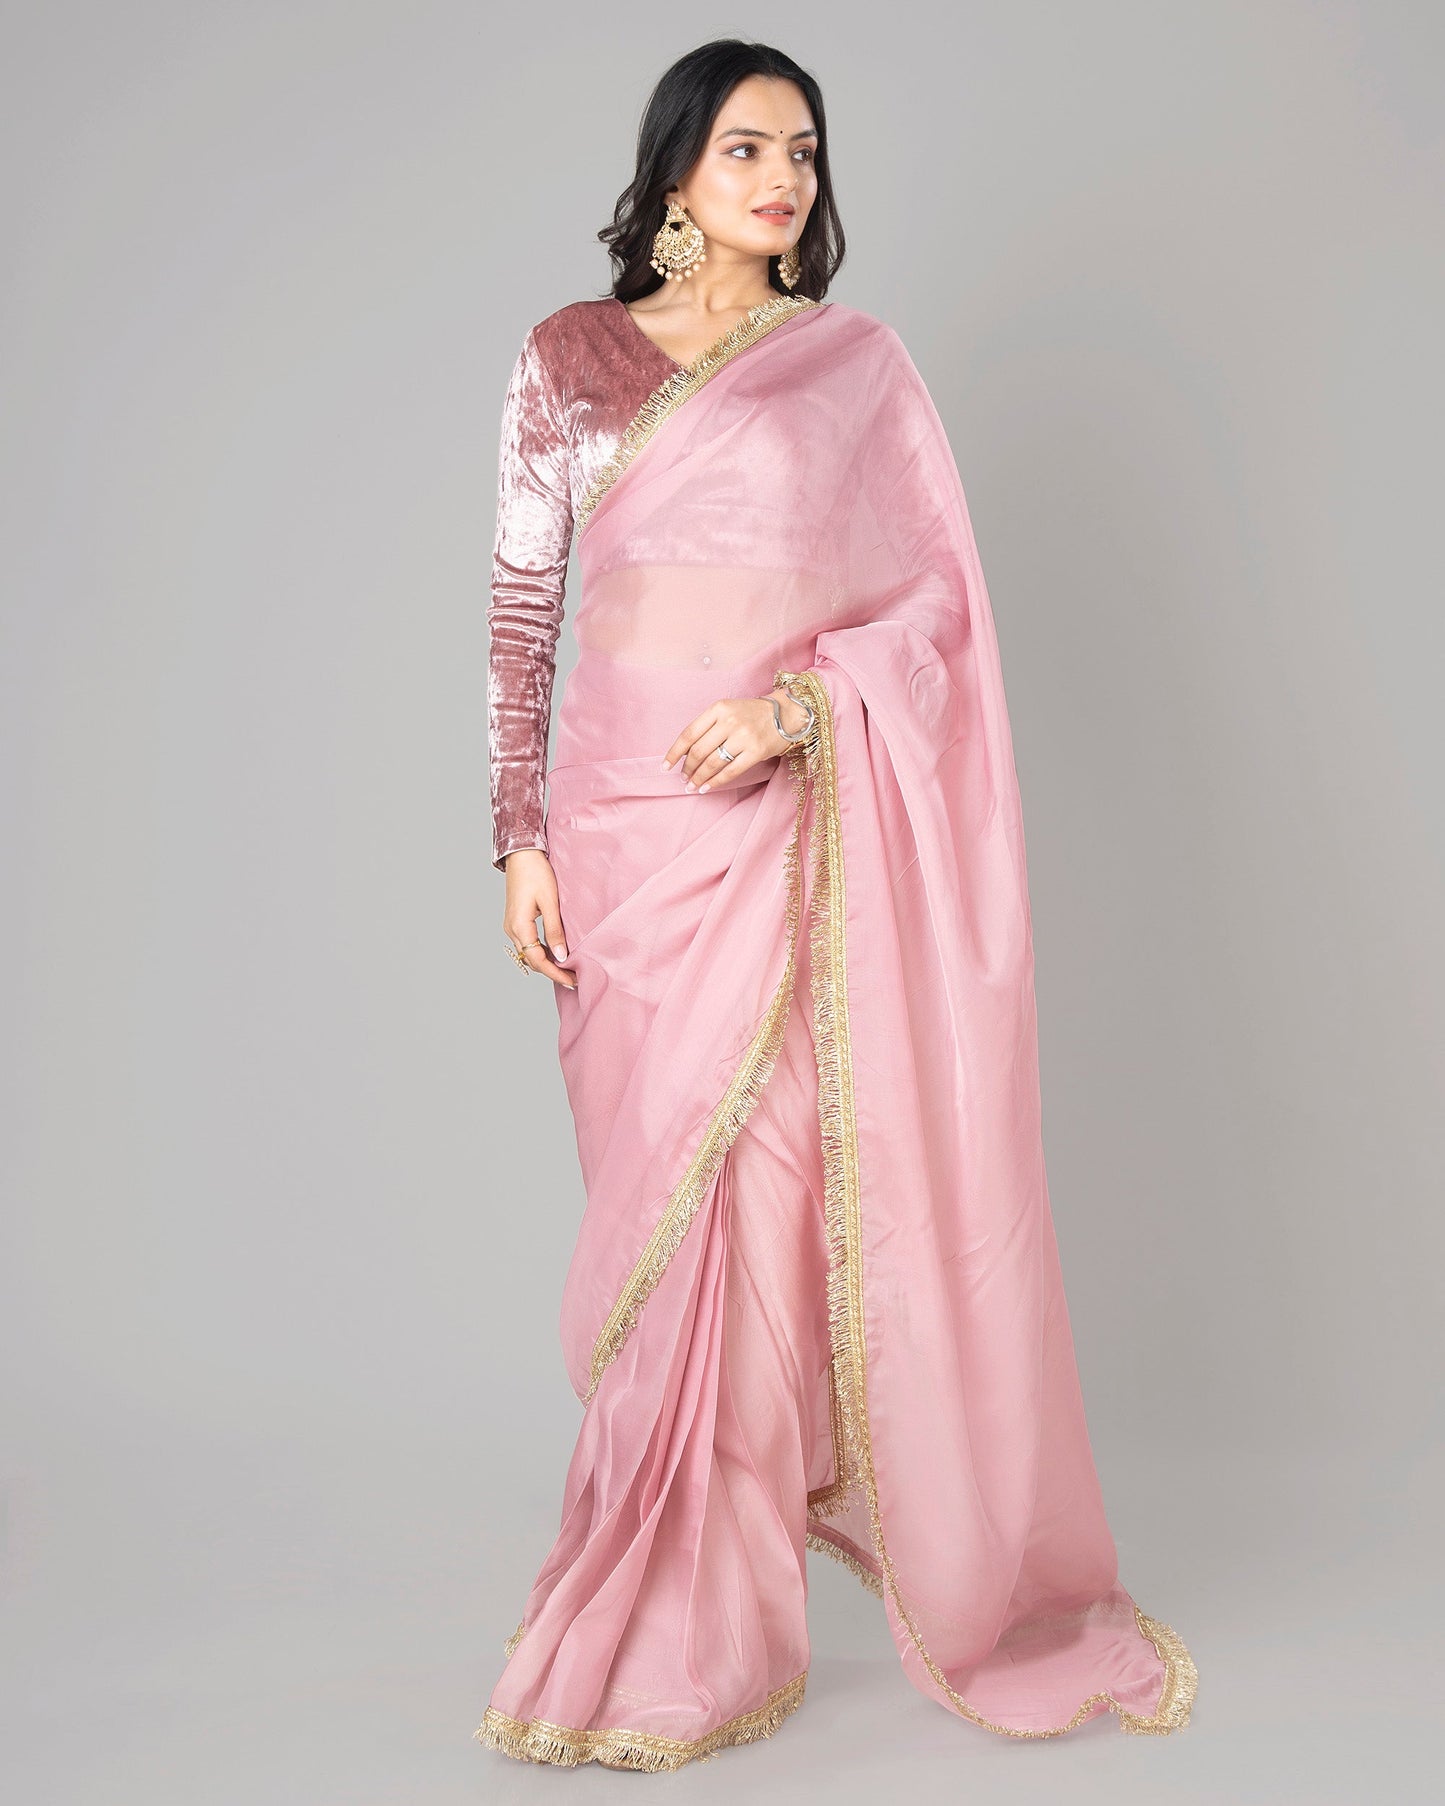 Lace-Trimmed Pure Organza Saree for Any Occasion